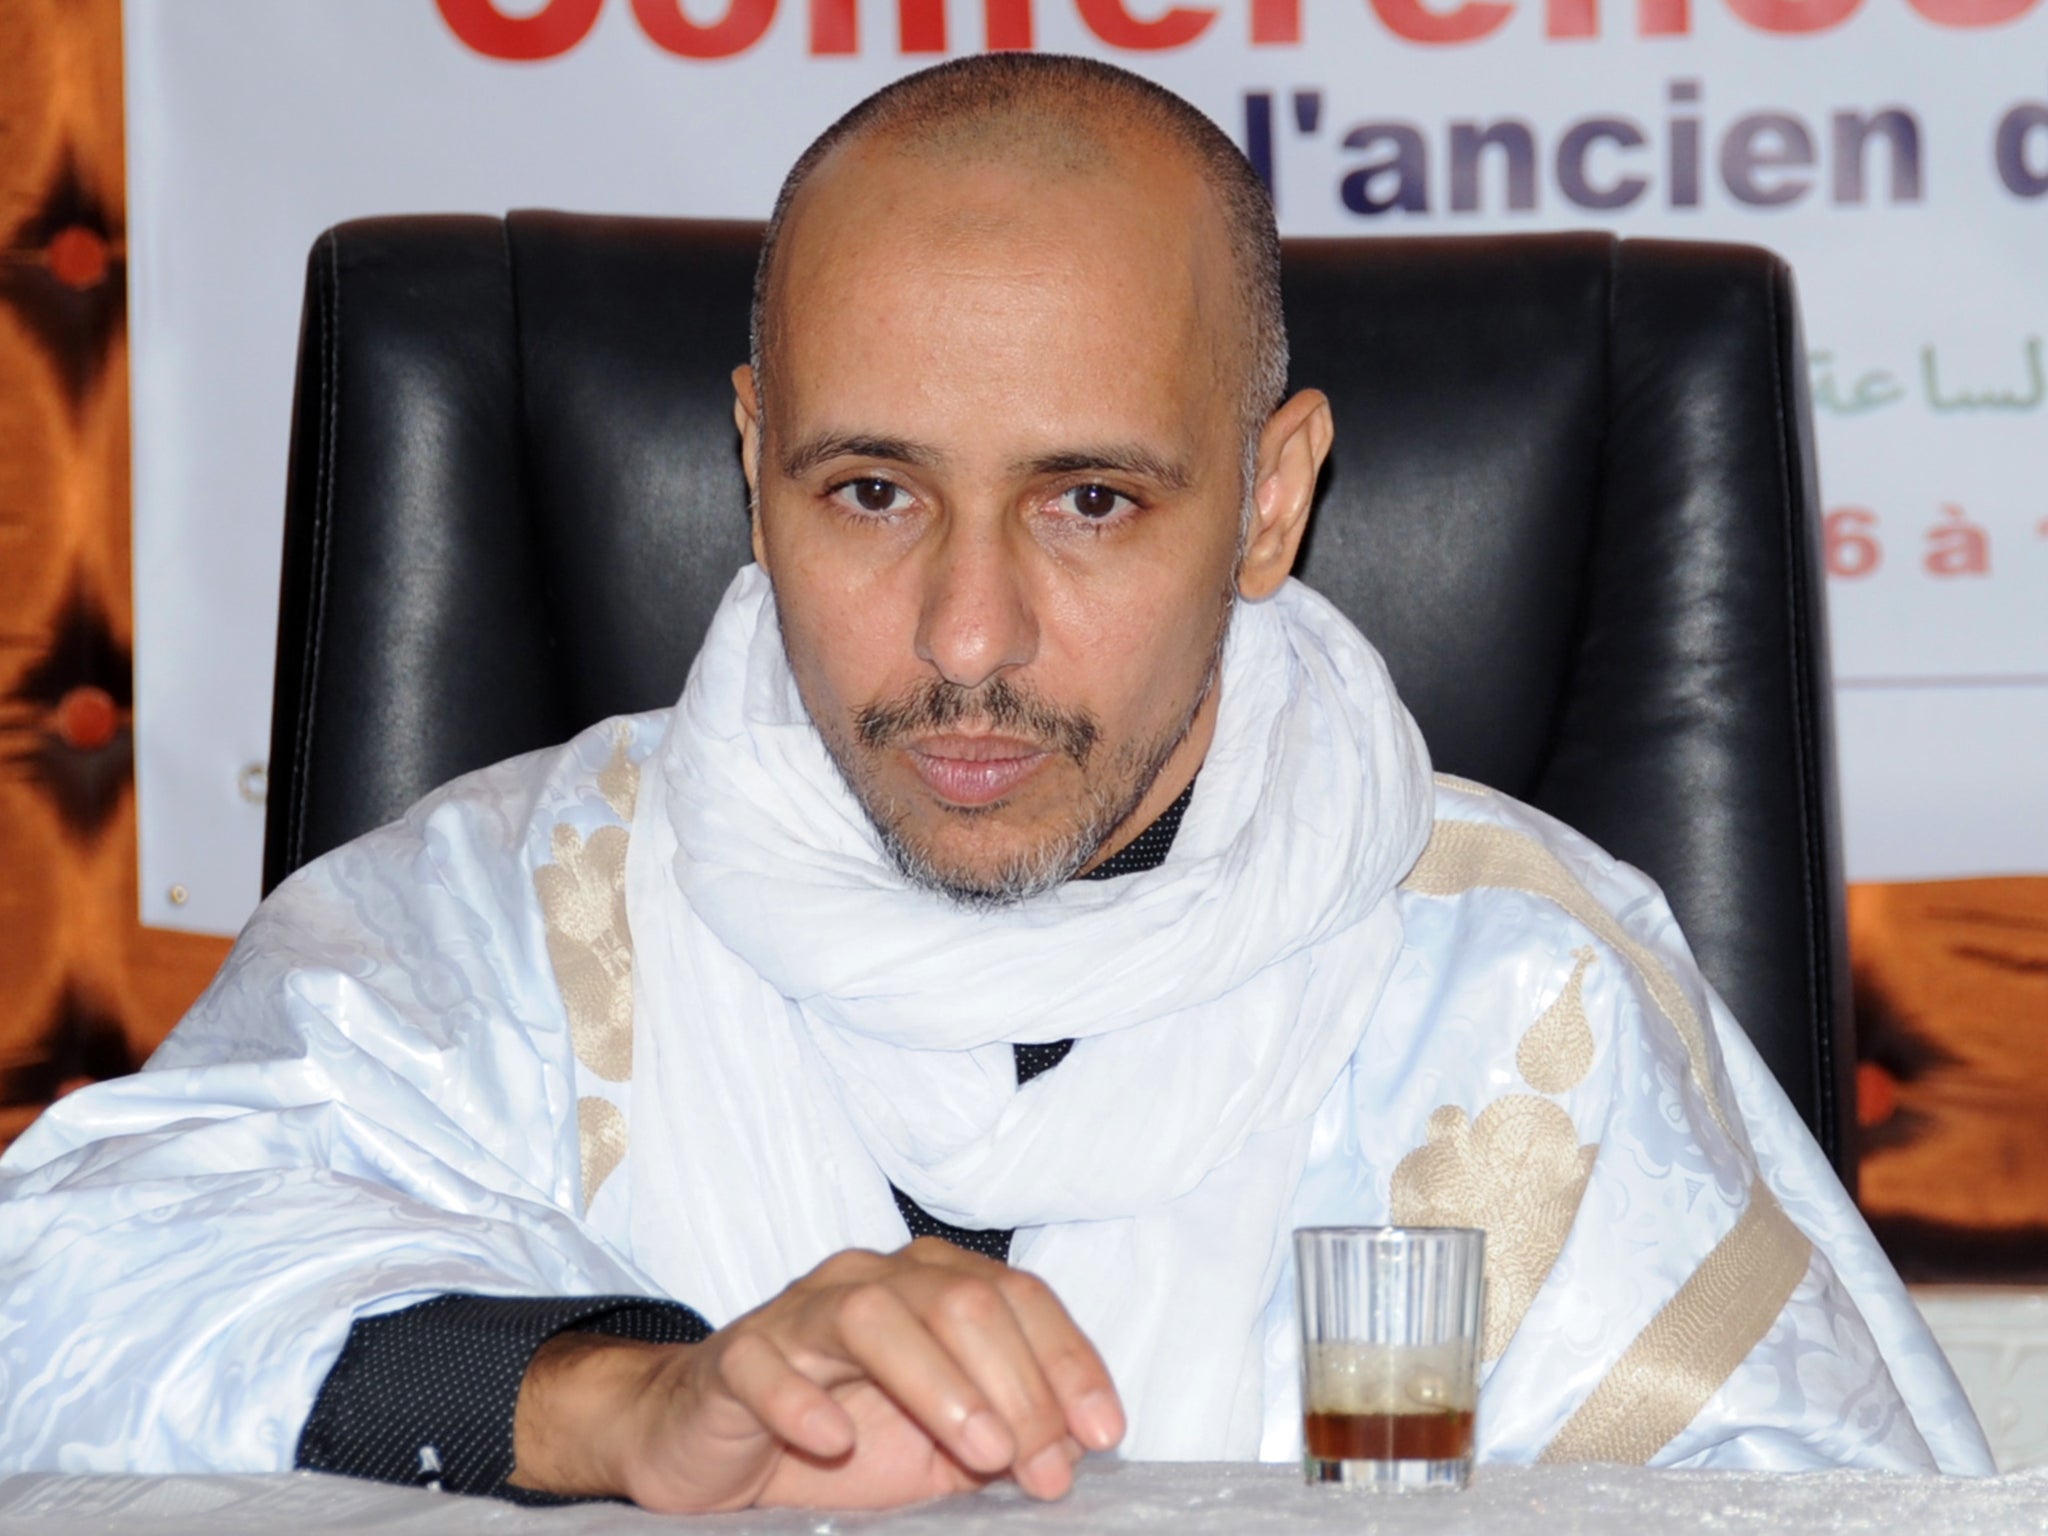 Slahi giving a press conference for his bestselling book in Nouakchott, capital of Mauritania, in 2016, after he was granted his freedom